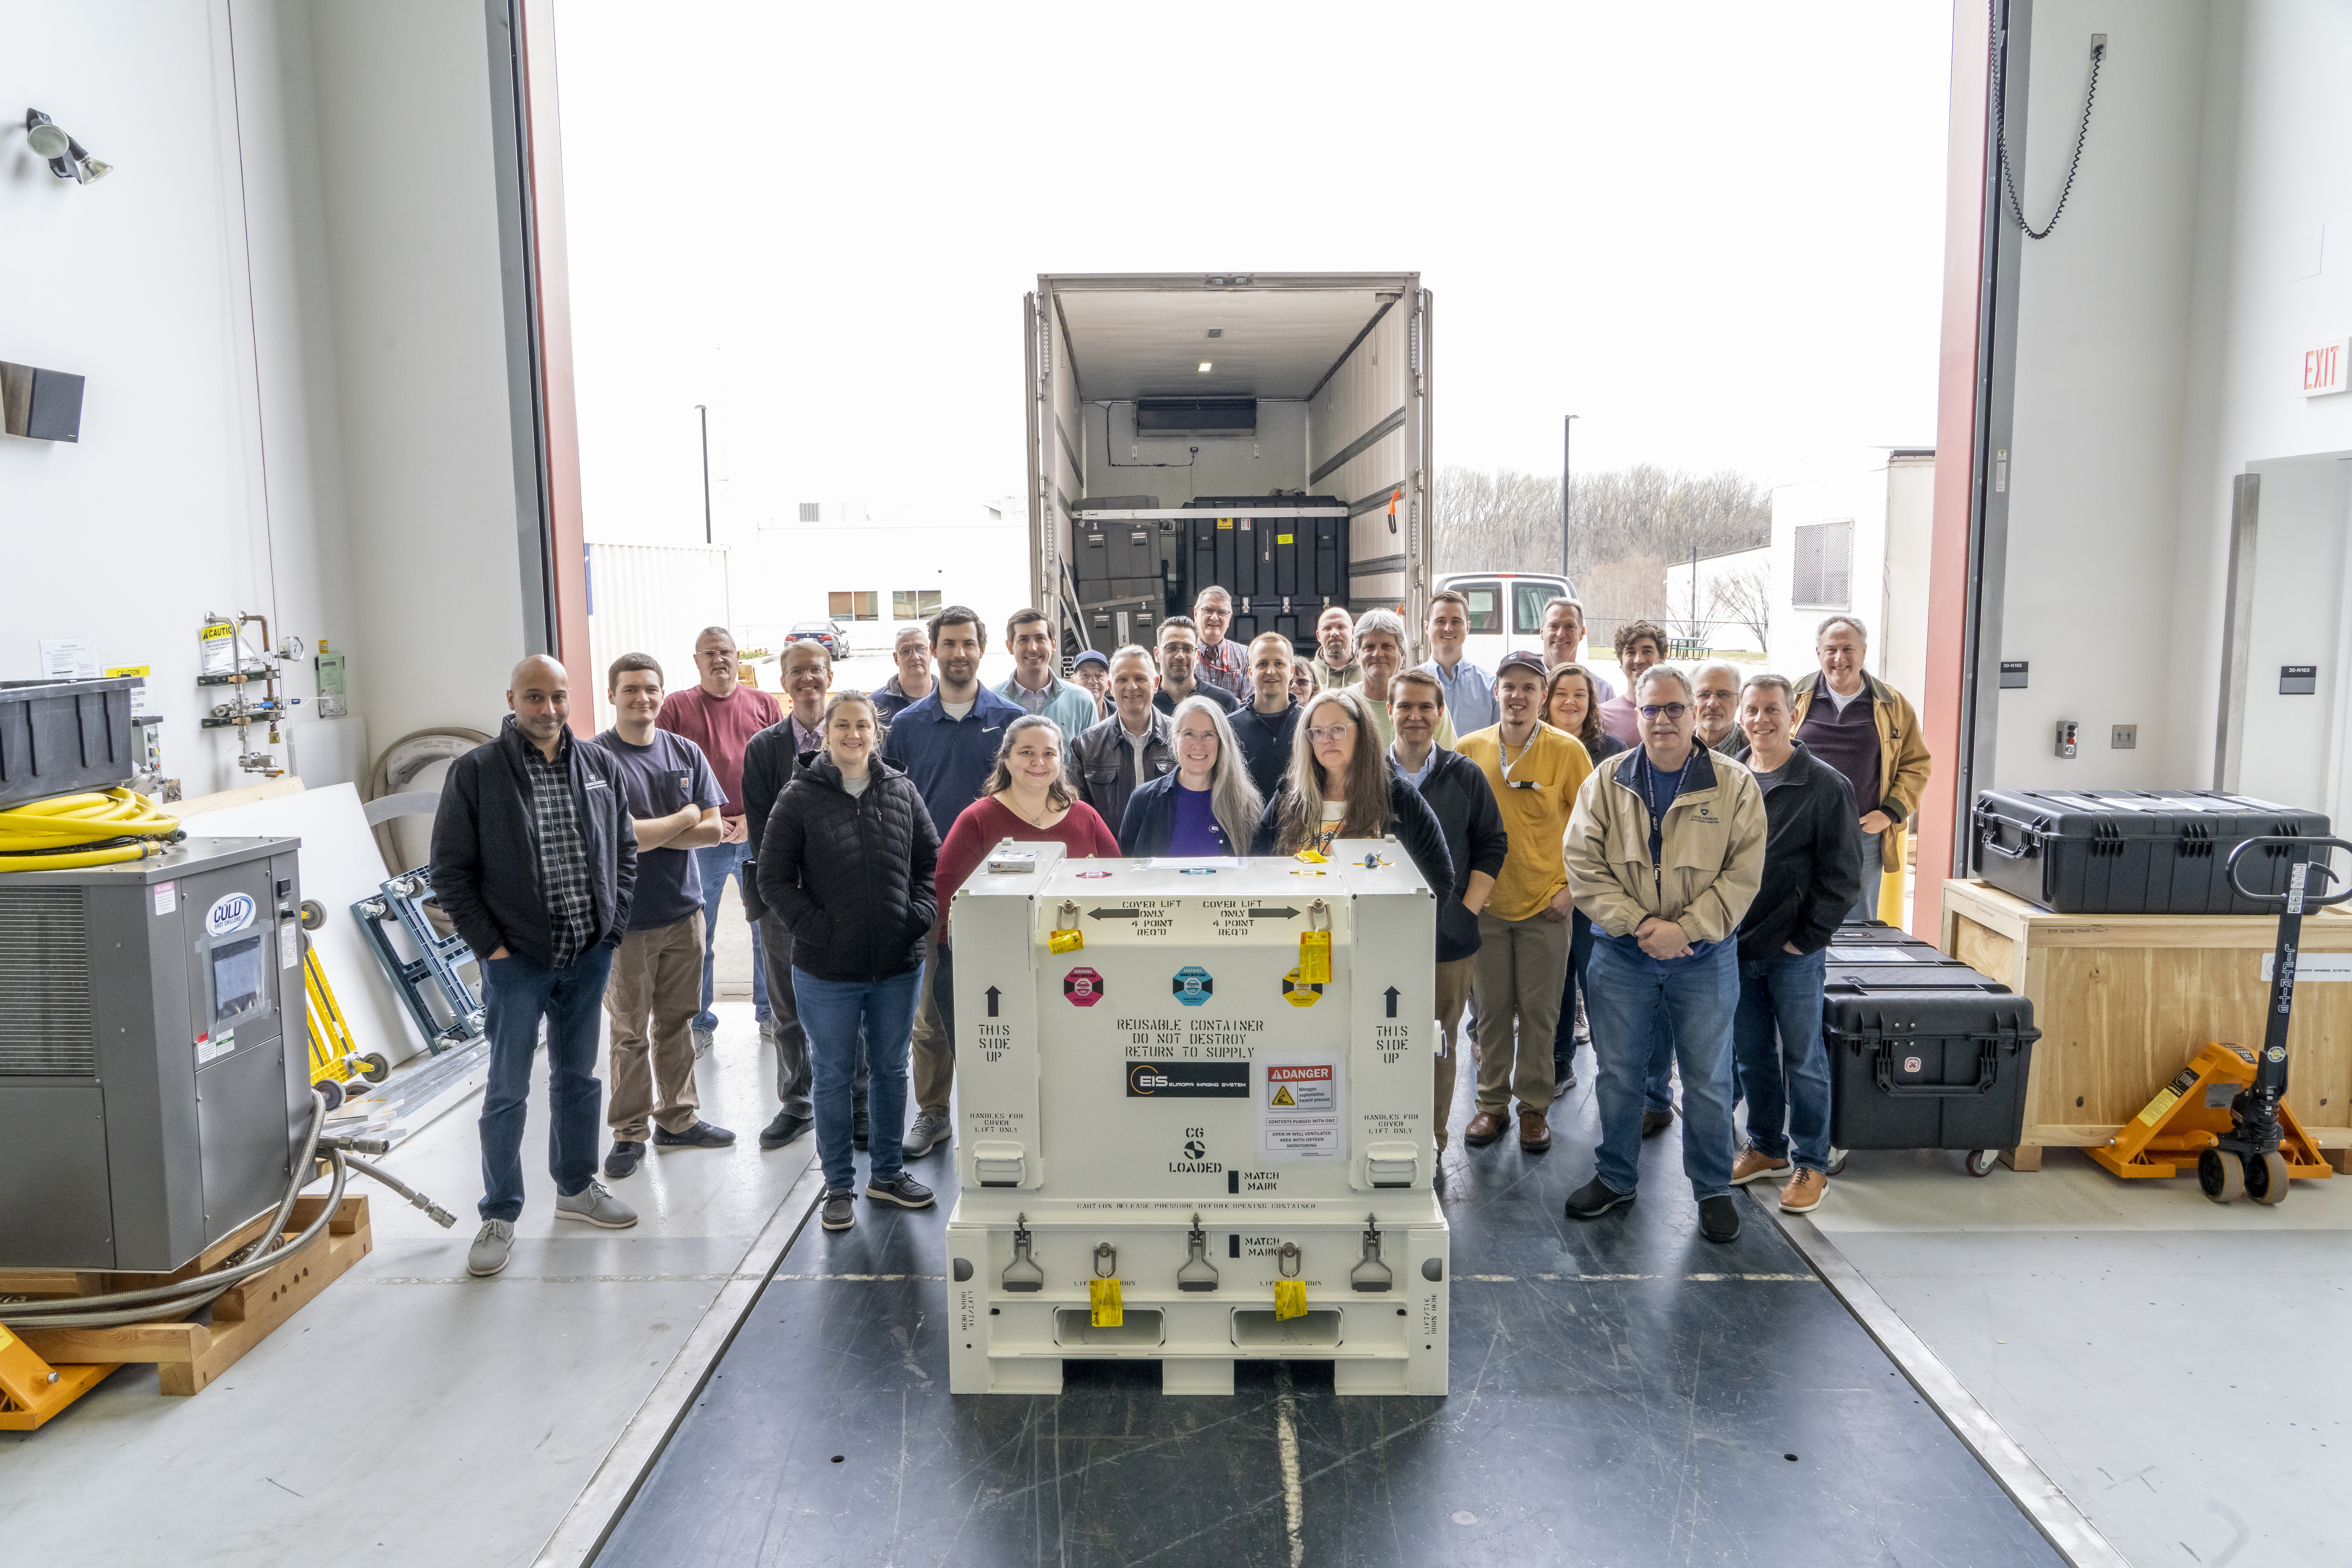 A group of people stand in front of the open doors of a FedEx truck and behind a closed white temperature-sensitive box that's holding the EIS NAC instrument